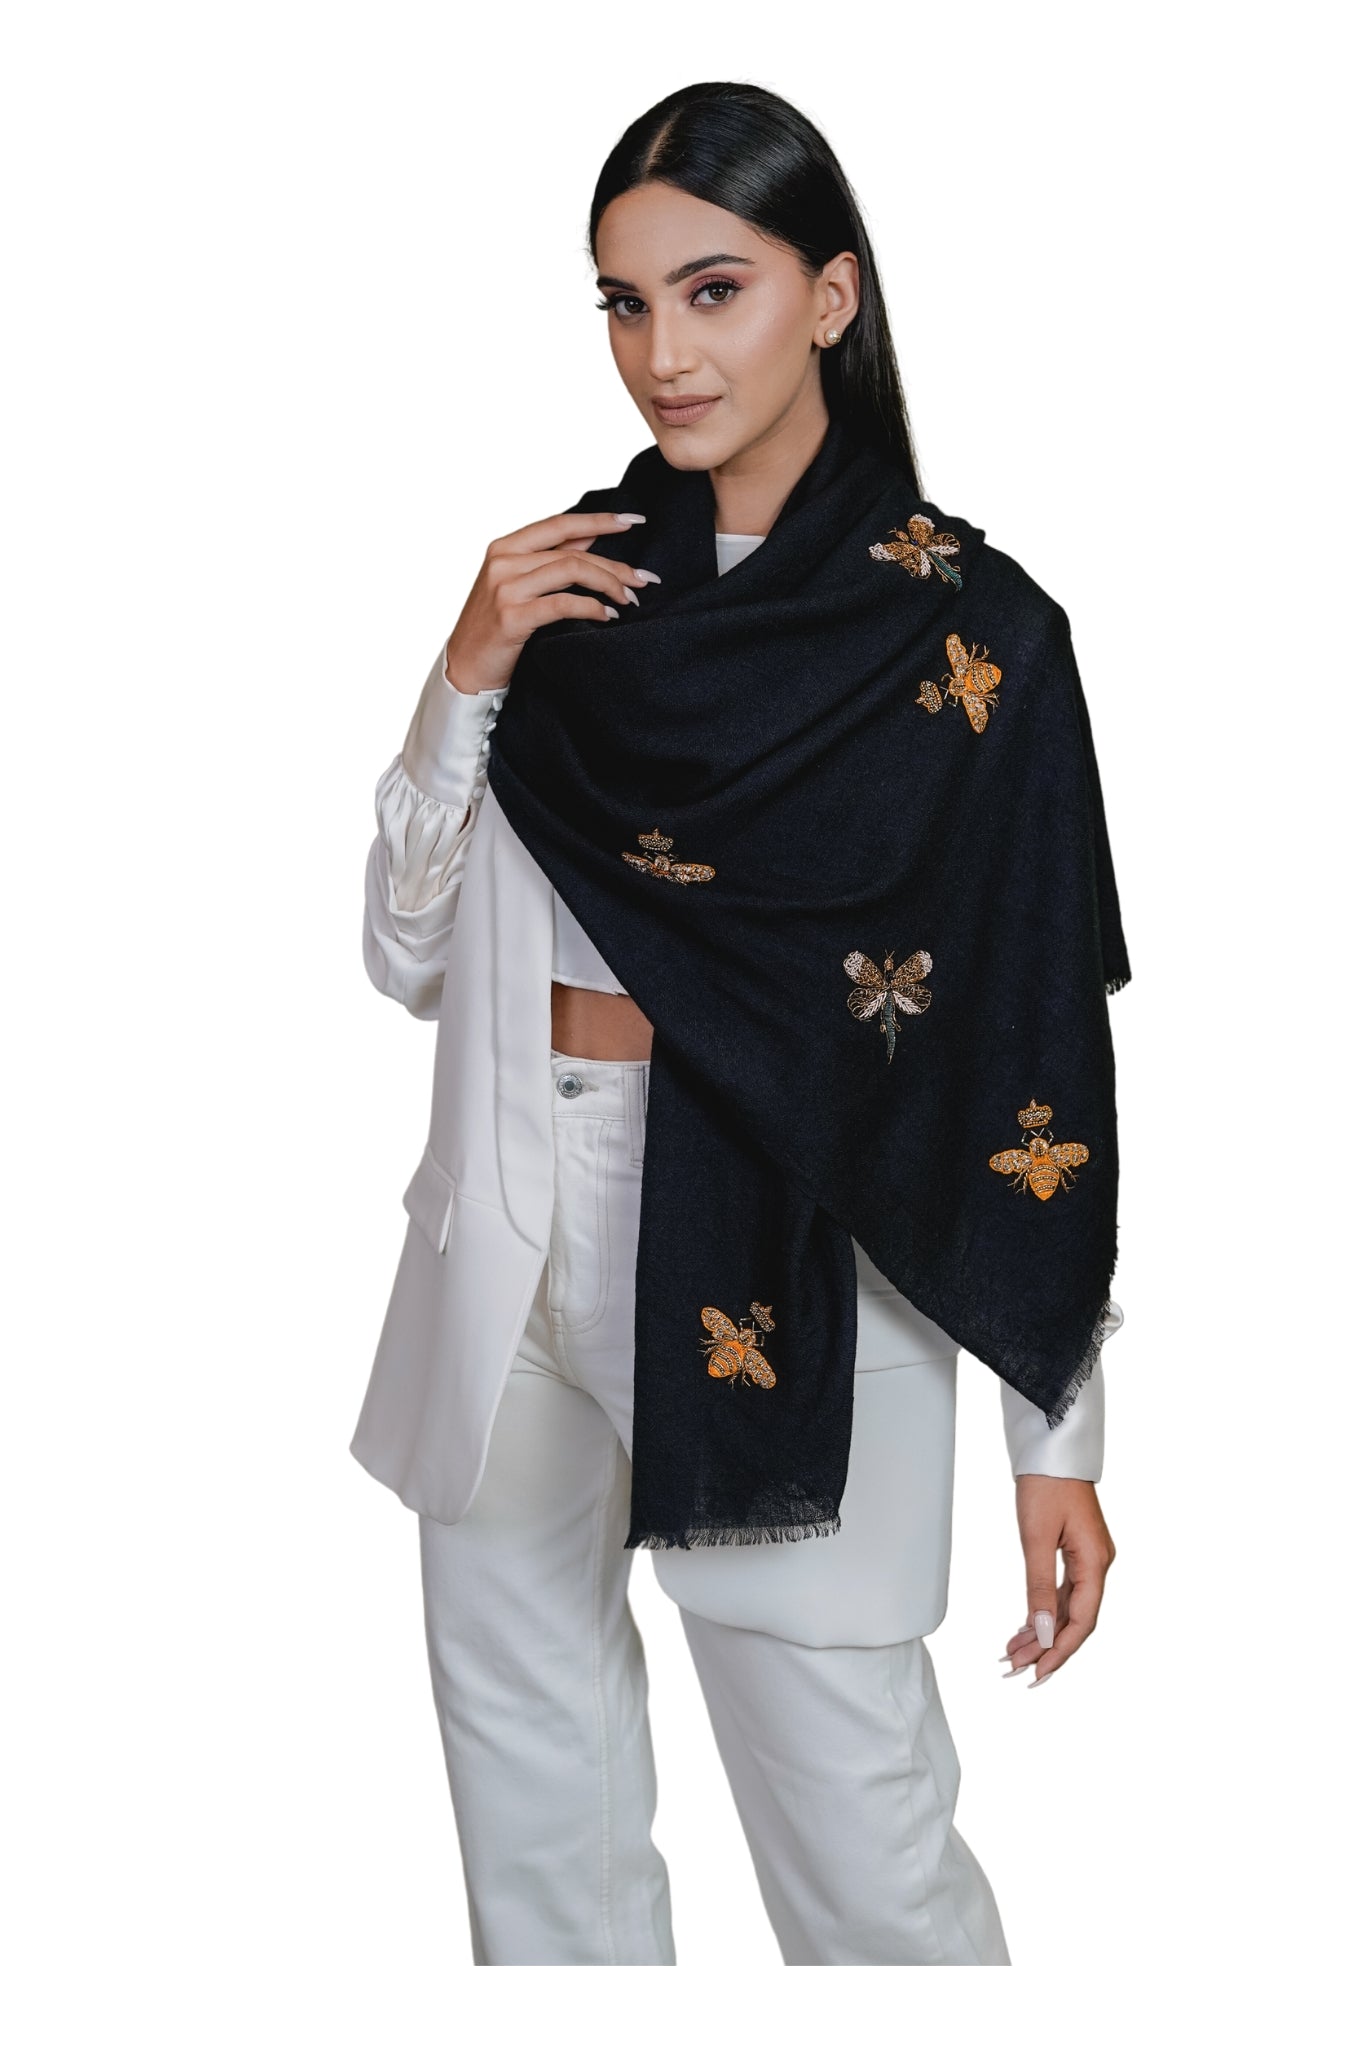 Buzzing Bees Cashmere Scarf